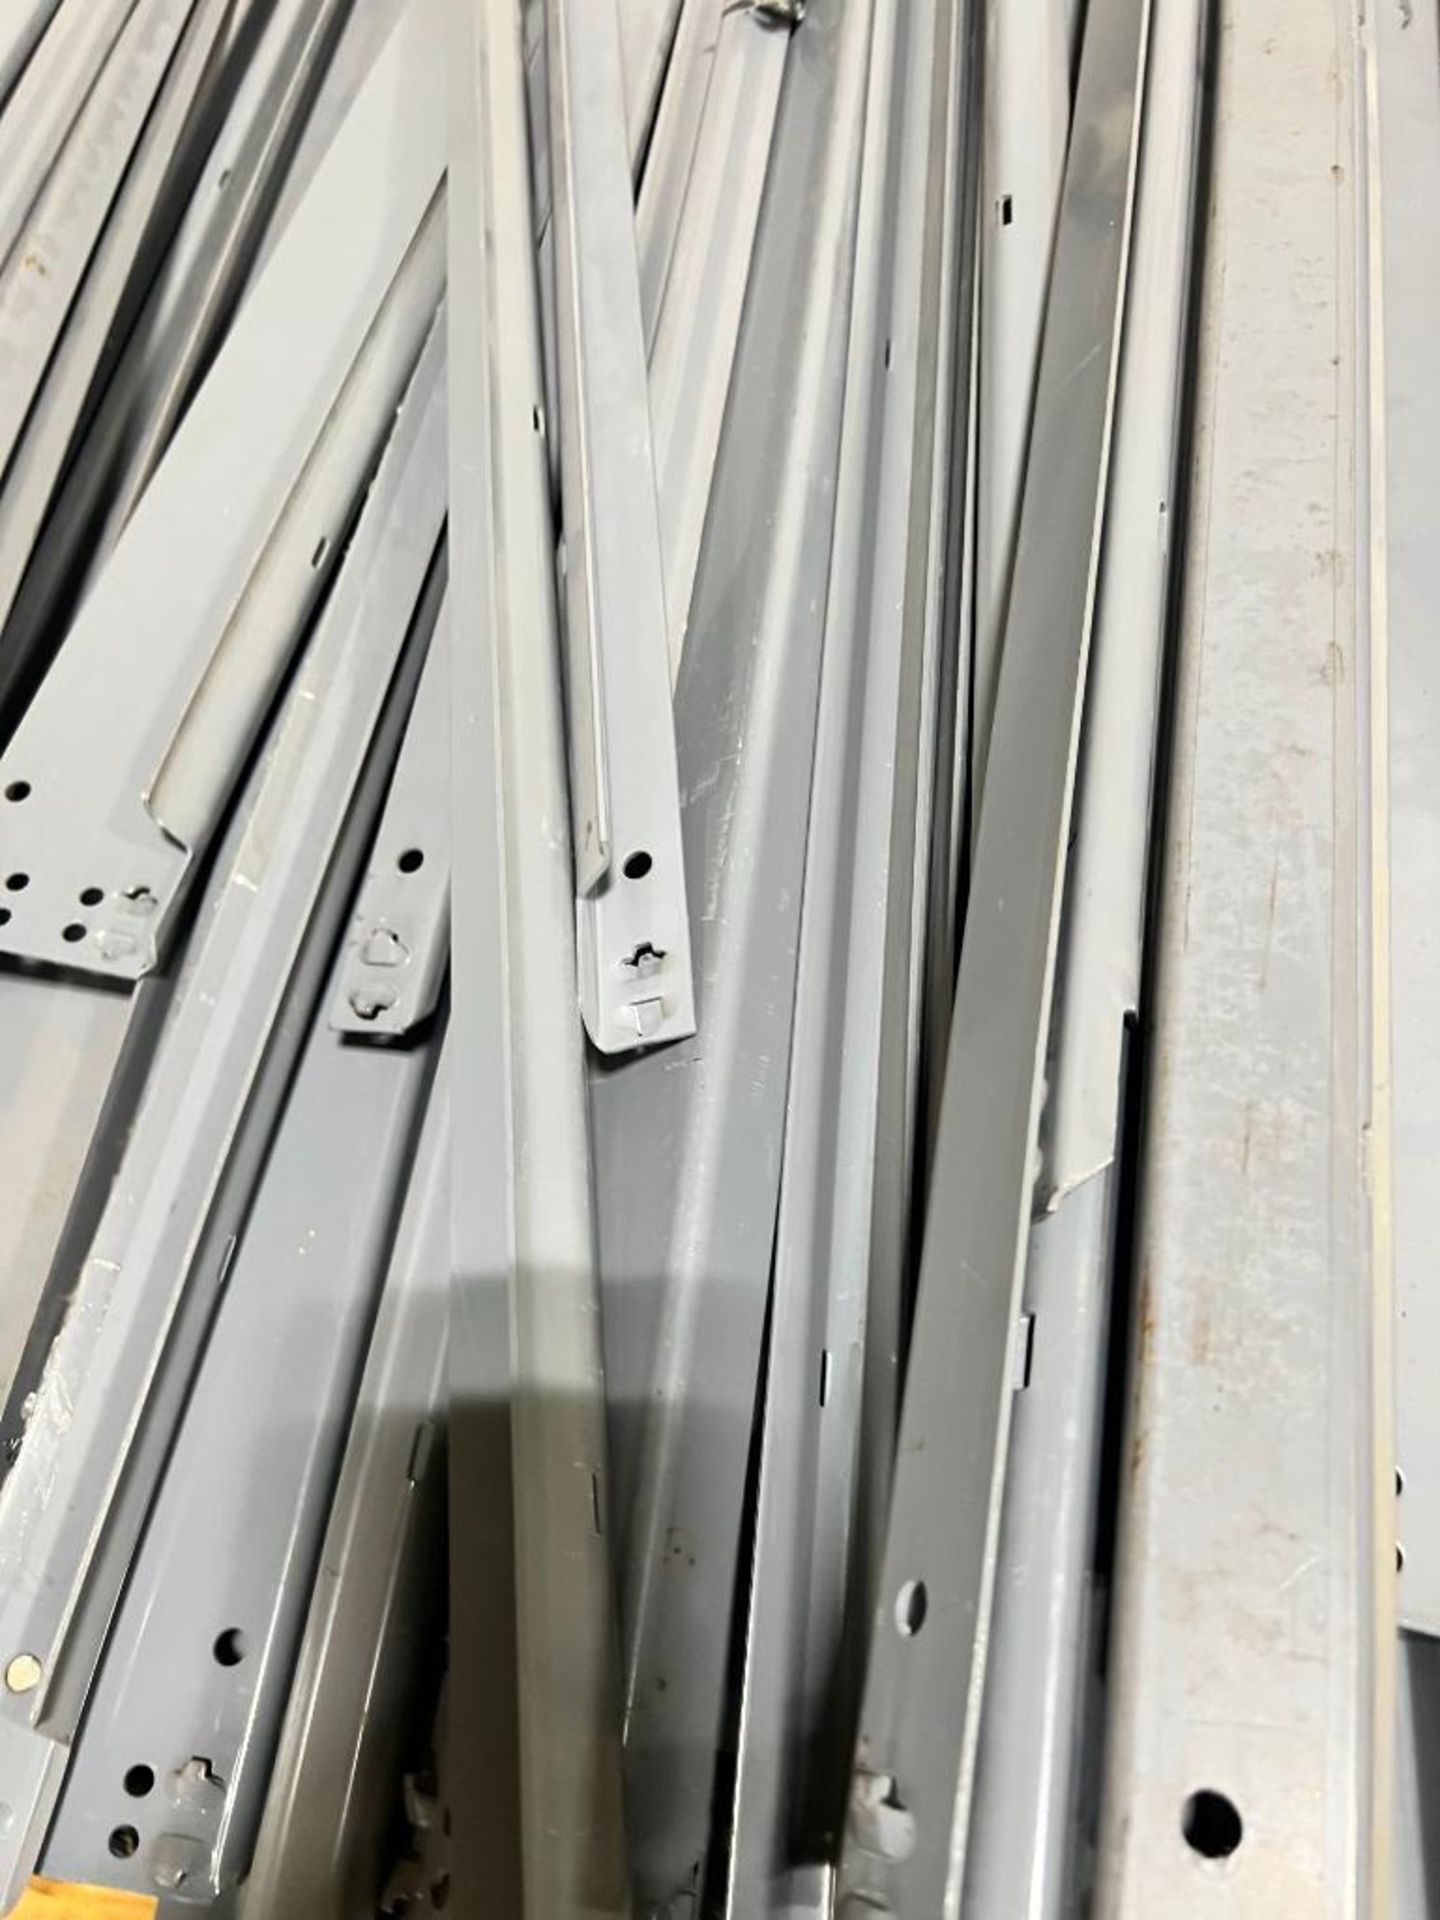 Skid of Republic Wedge Lock Assorted Shelving Components - Image 3 of 5